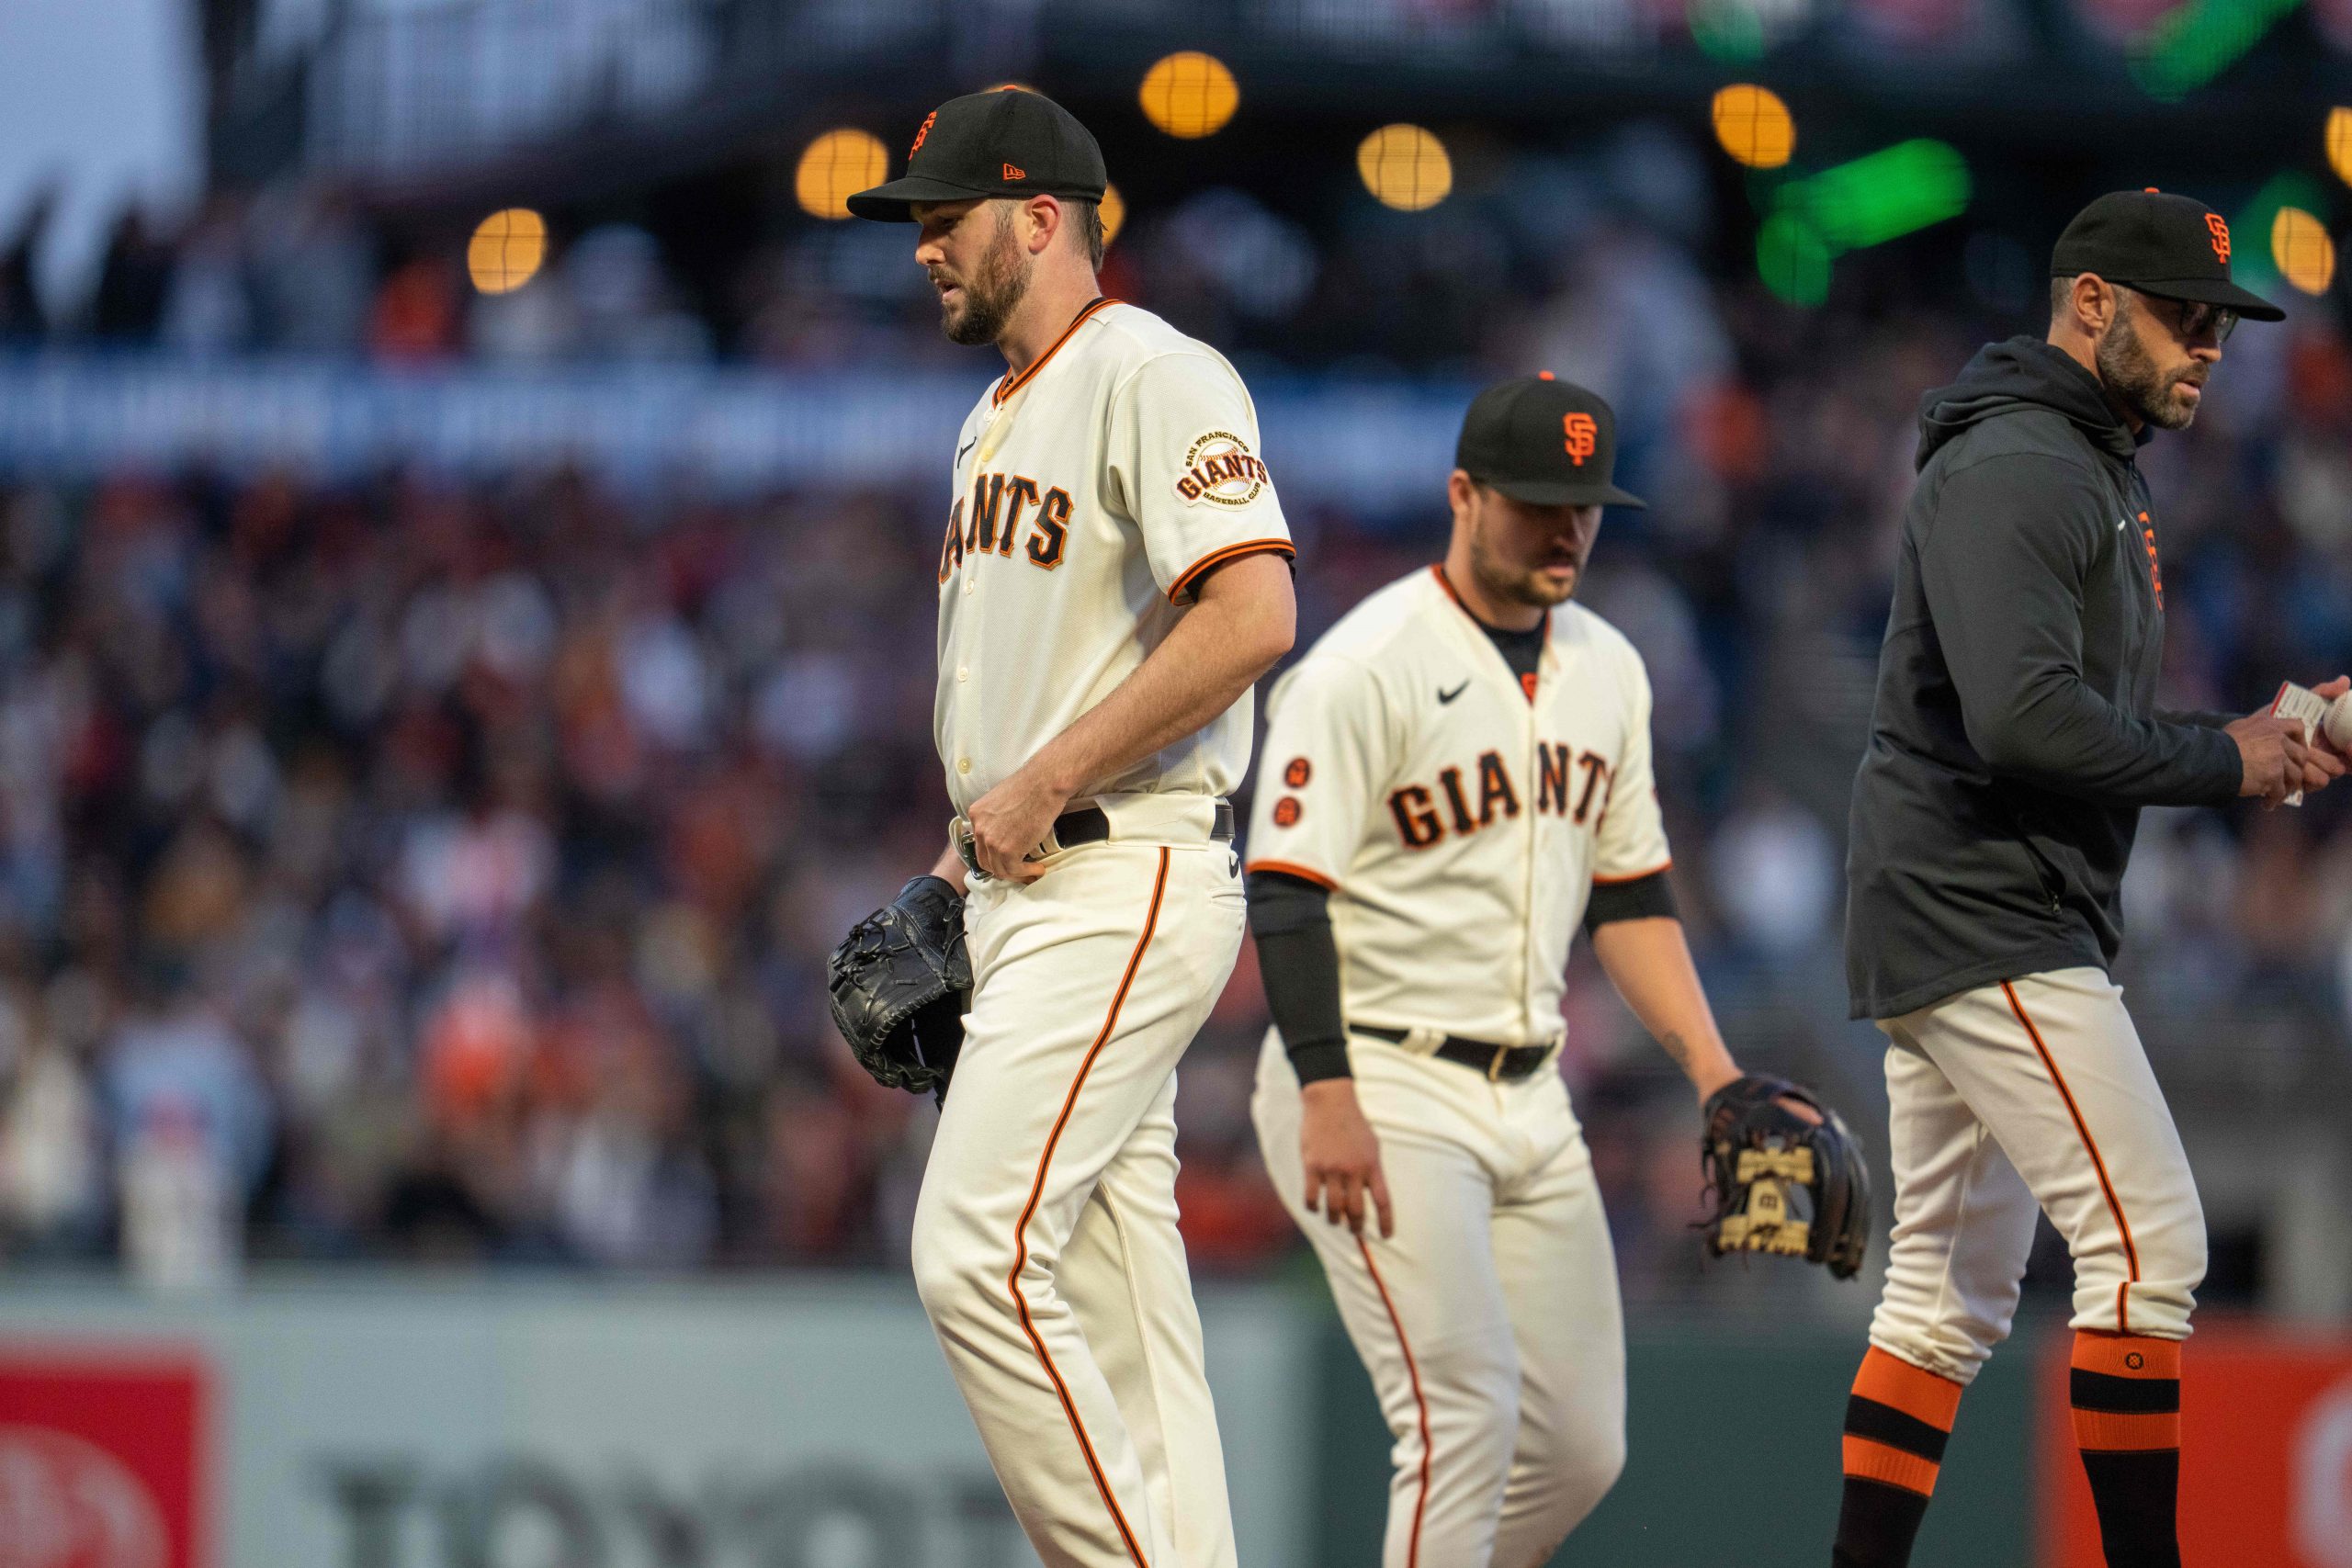 When Will the Giants Lineup Be More Than Mediocre? -Baseball